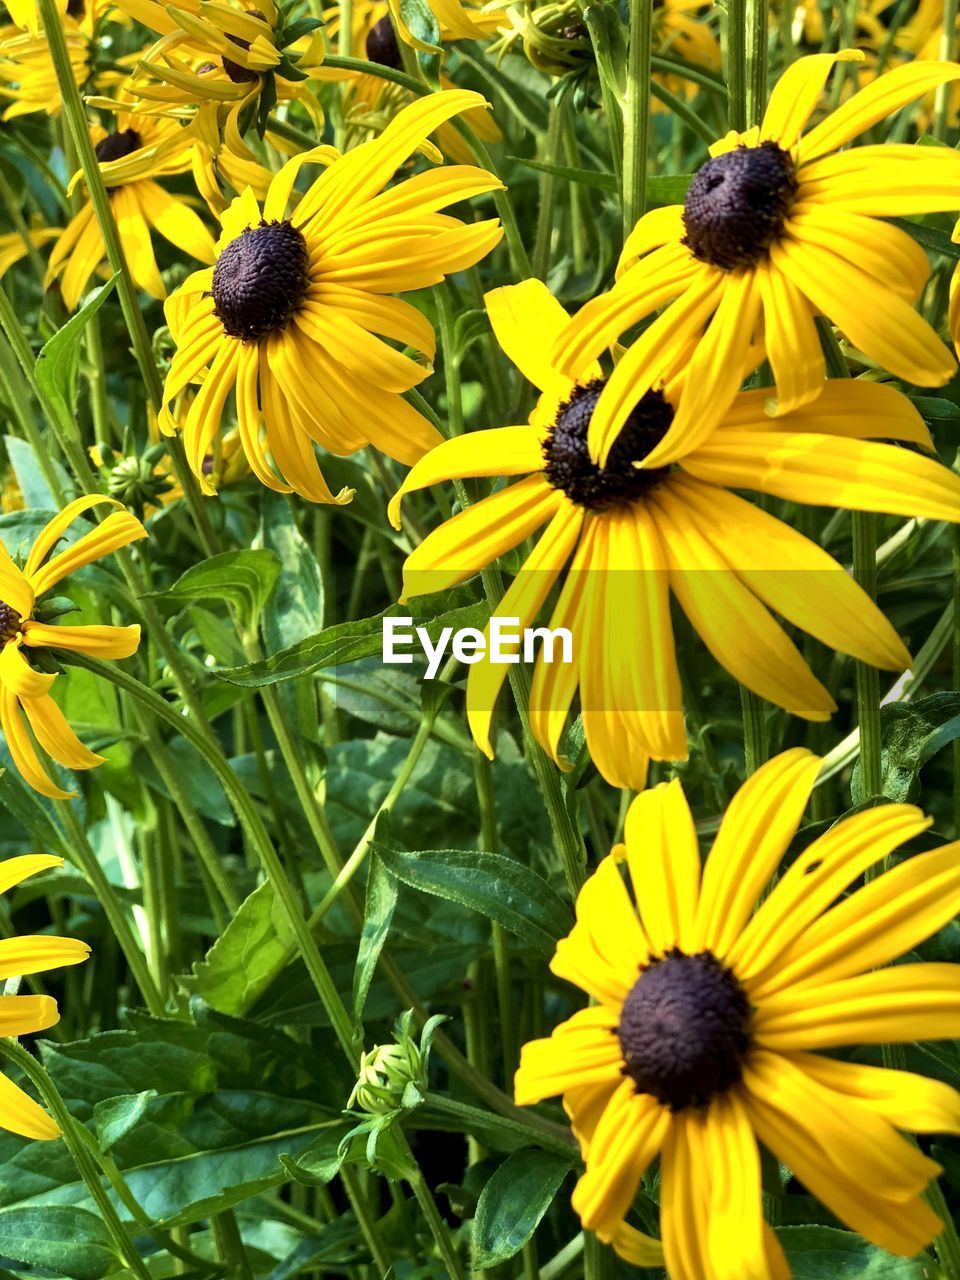 CLOSE-UP OF YELLOW BLACK-EYED AND DAISY